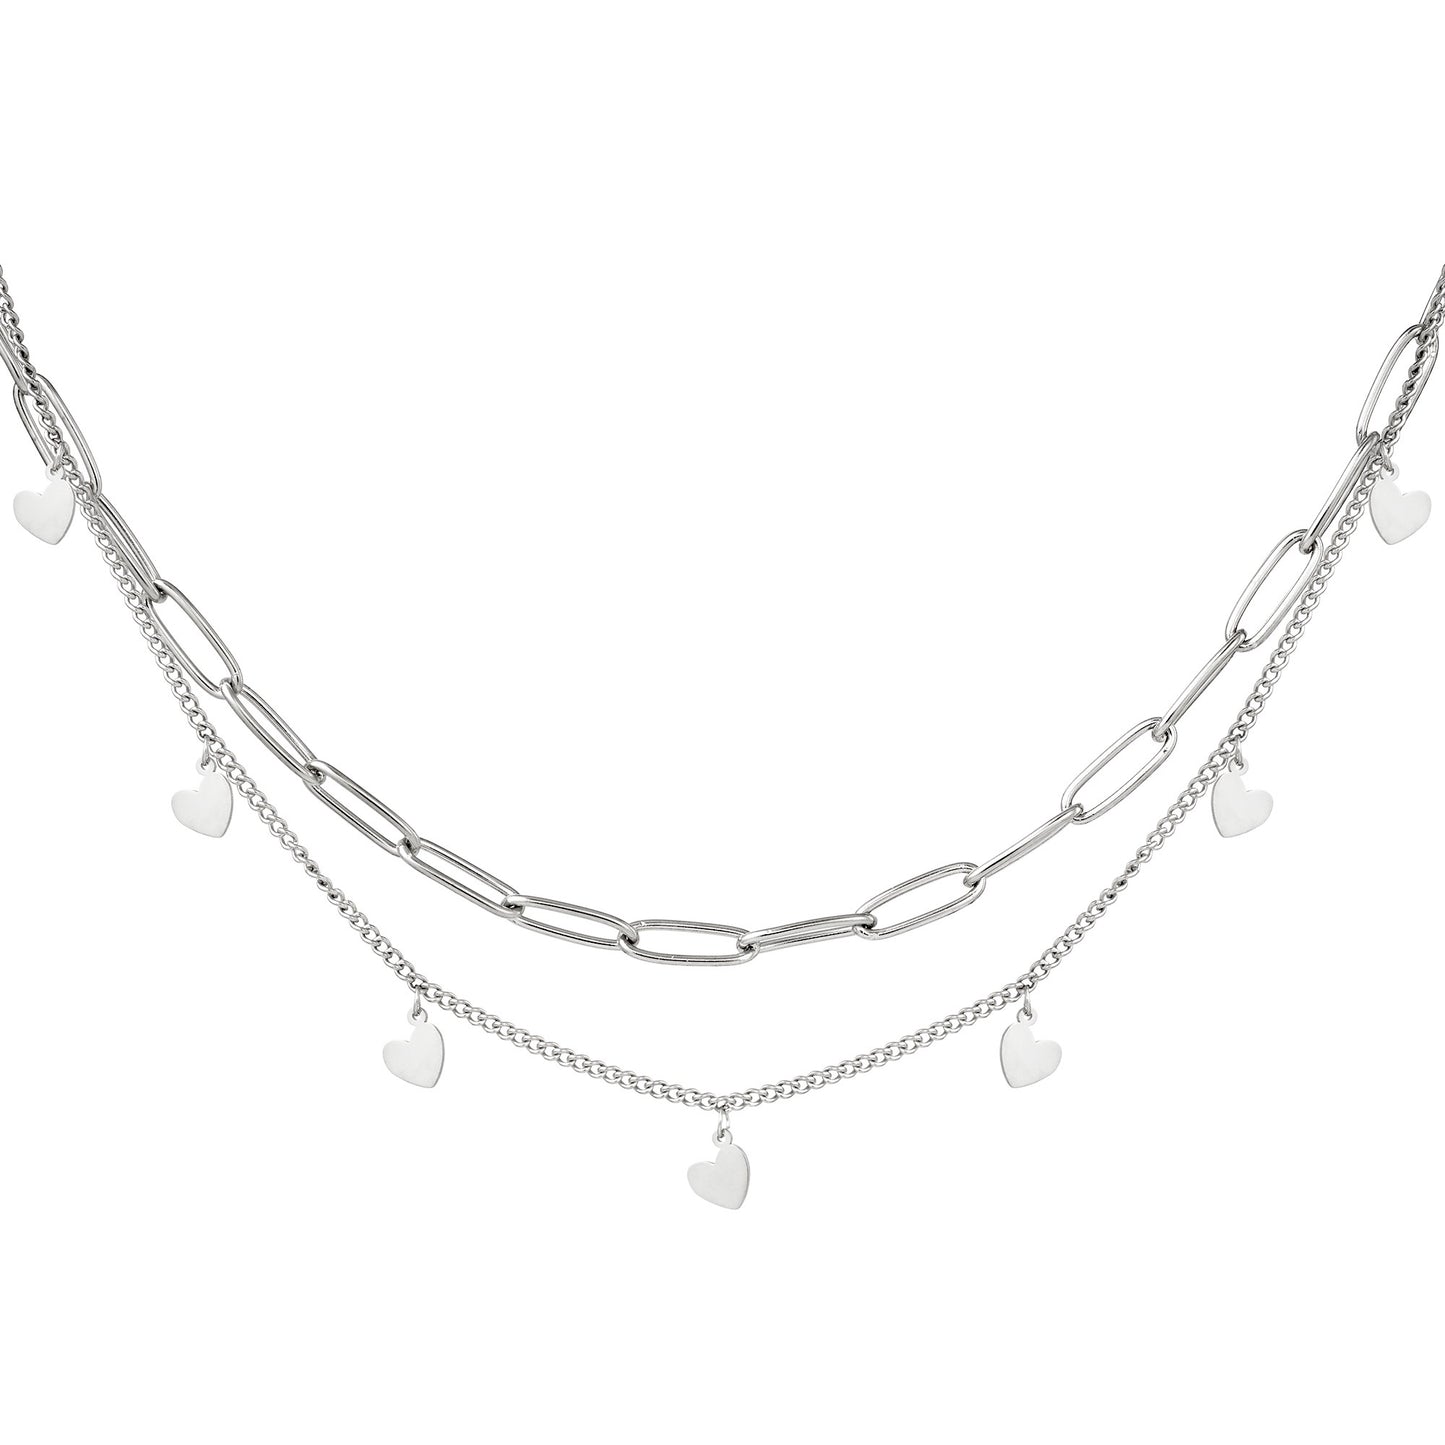 Chainy Hearts Necklace Silver